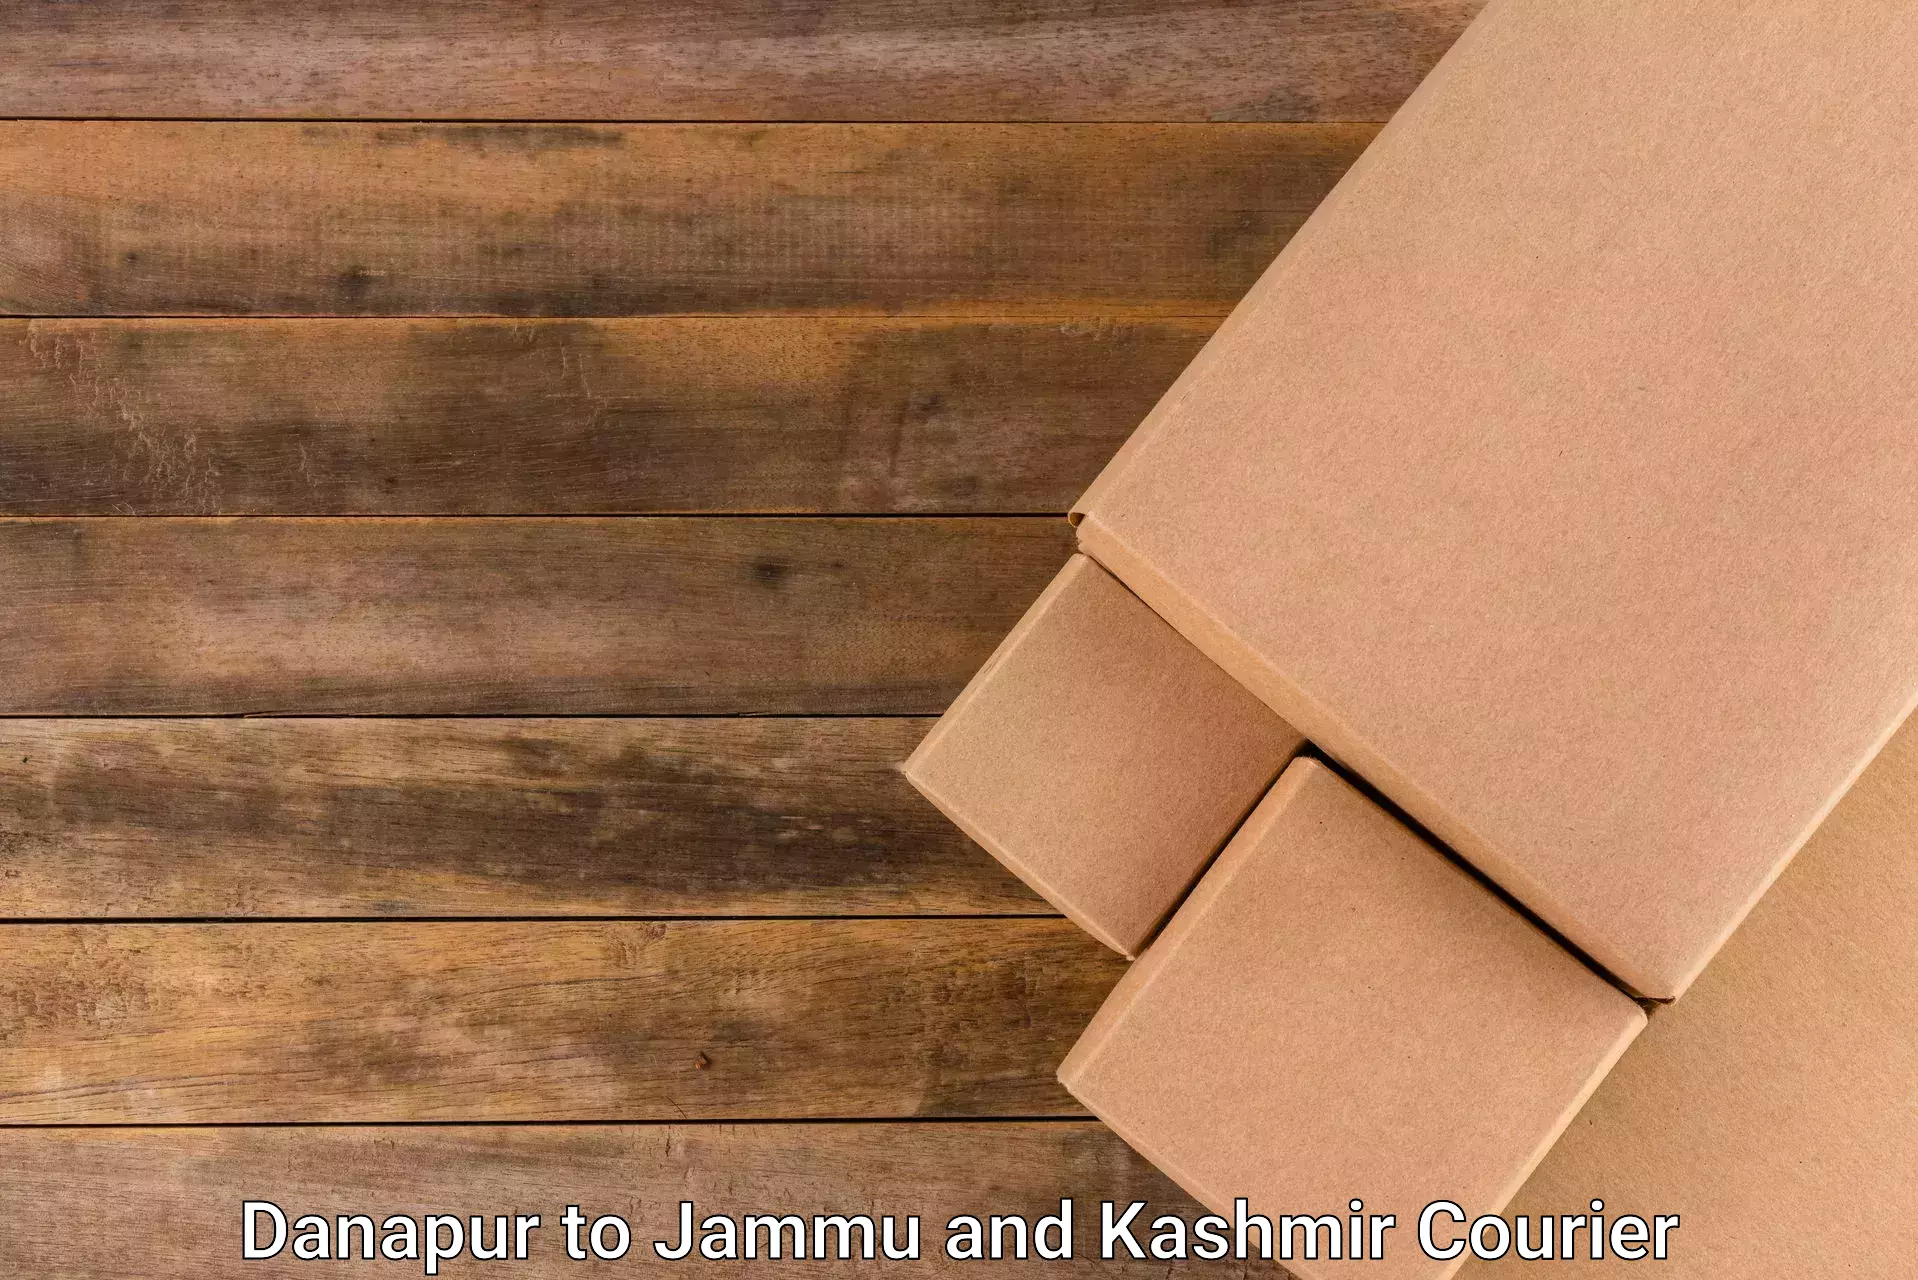 High-quality delivery services in Danapur to Jammu and Kashmir